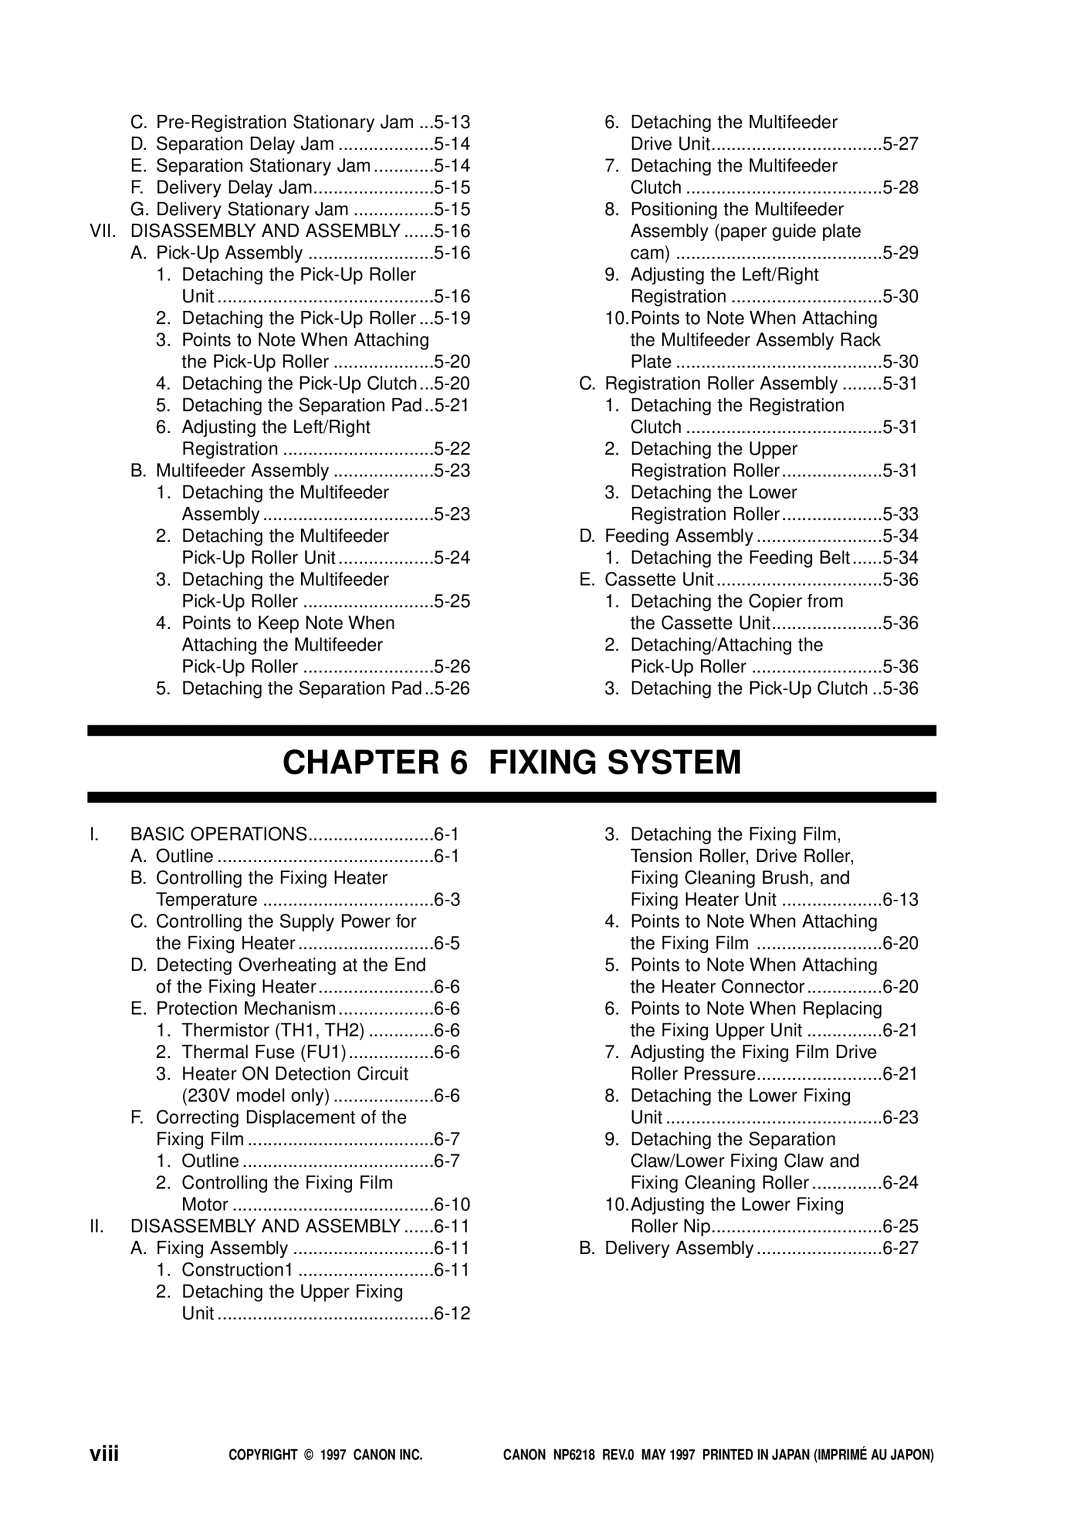 Canon NP6218, FY8-13EX-000 service manual Fixing System, viii 